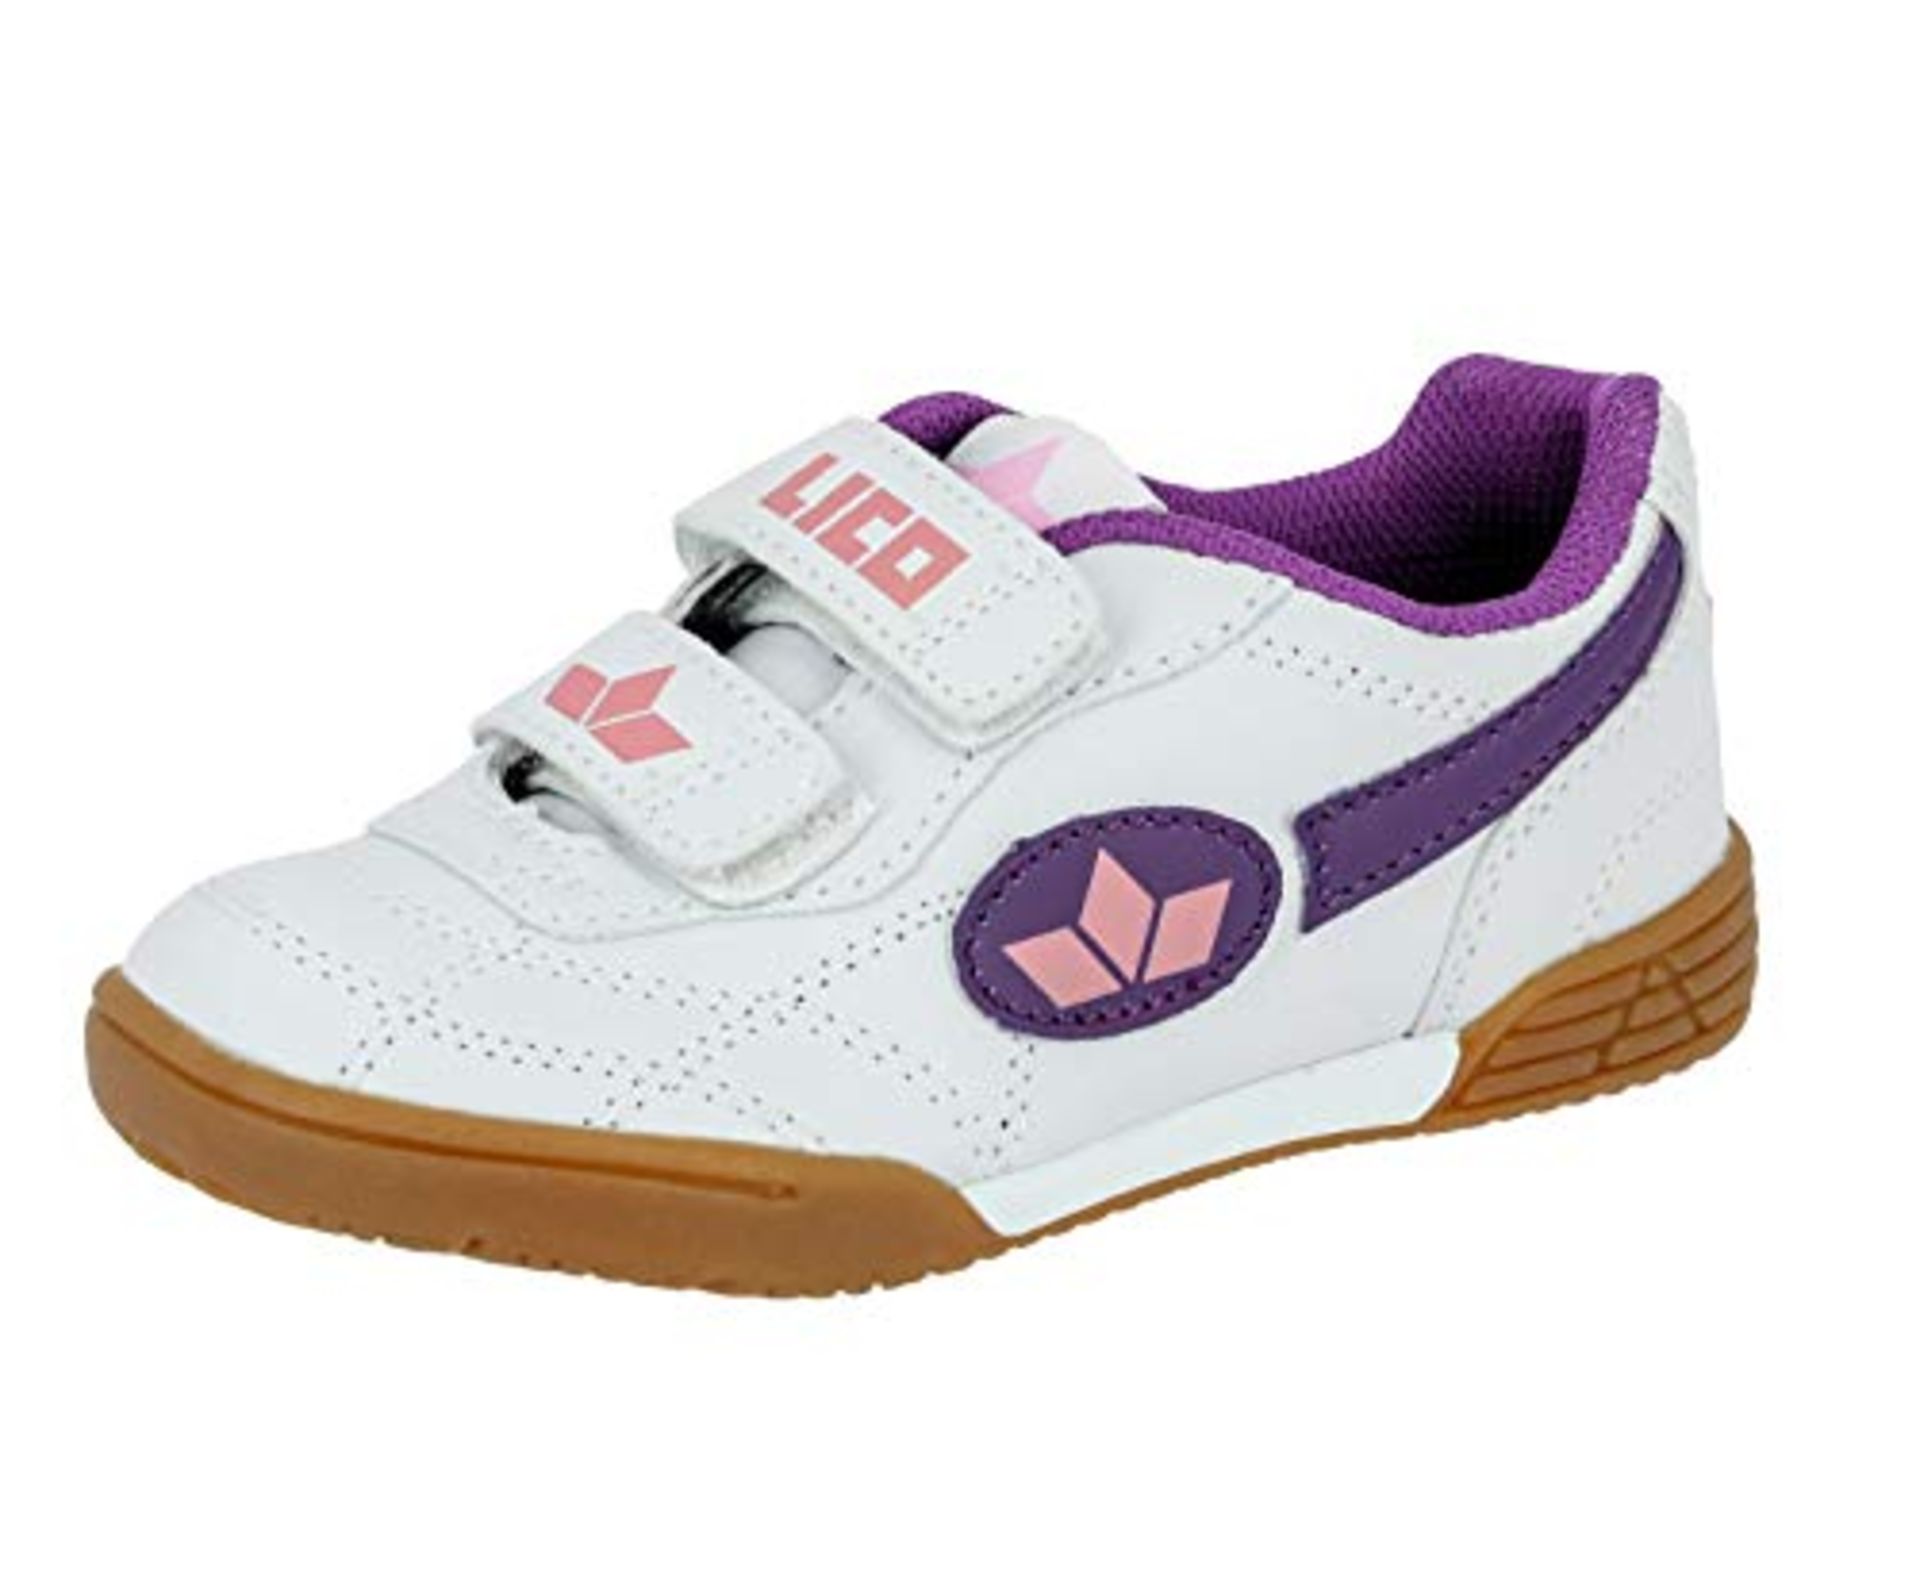 BRAND NEW Lico Girls’ Bernie V Multisport Indoor Shoes, Purple / Pink, Bianco (weiss/lila), 6 UK RRP - Image 4 of 4